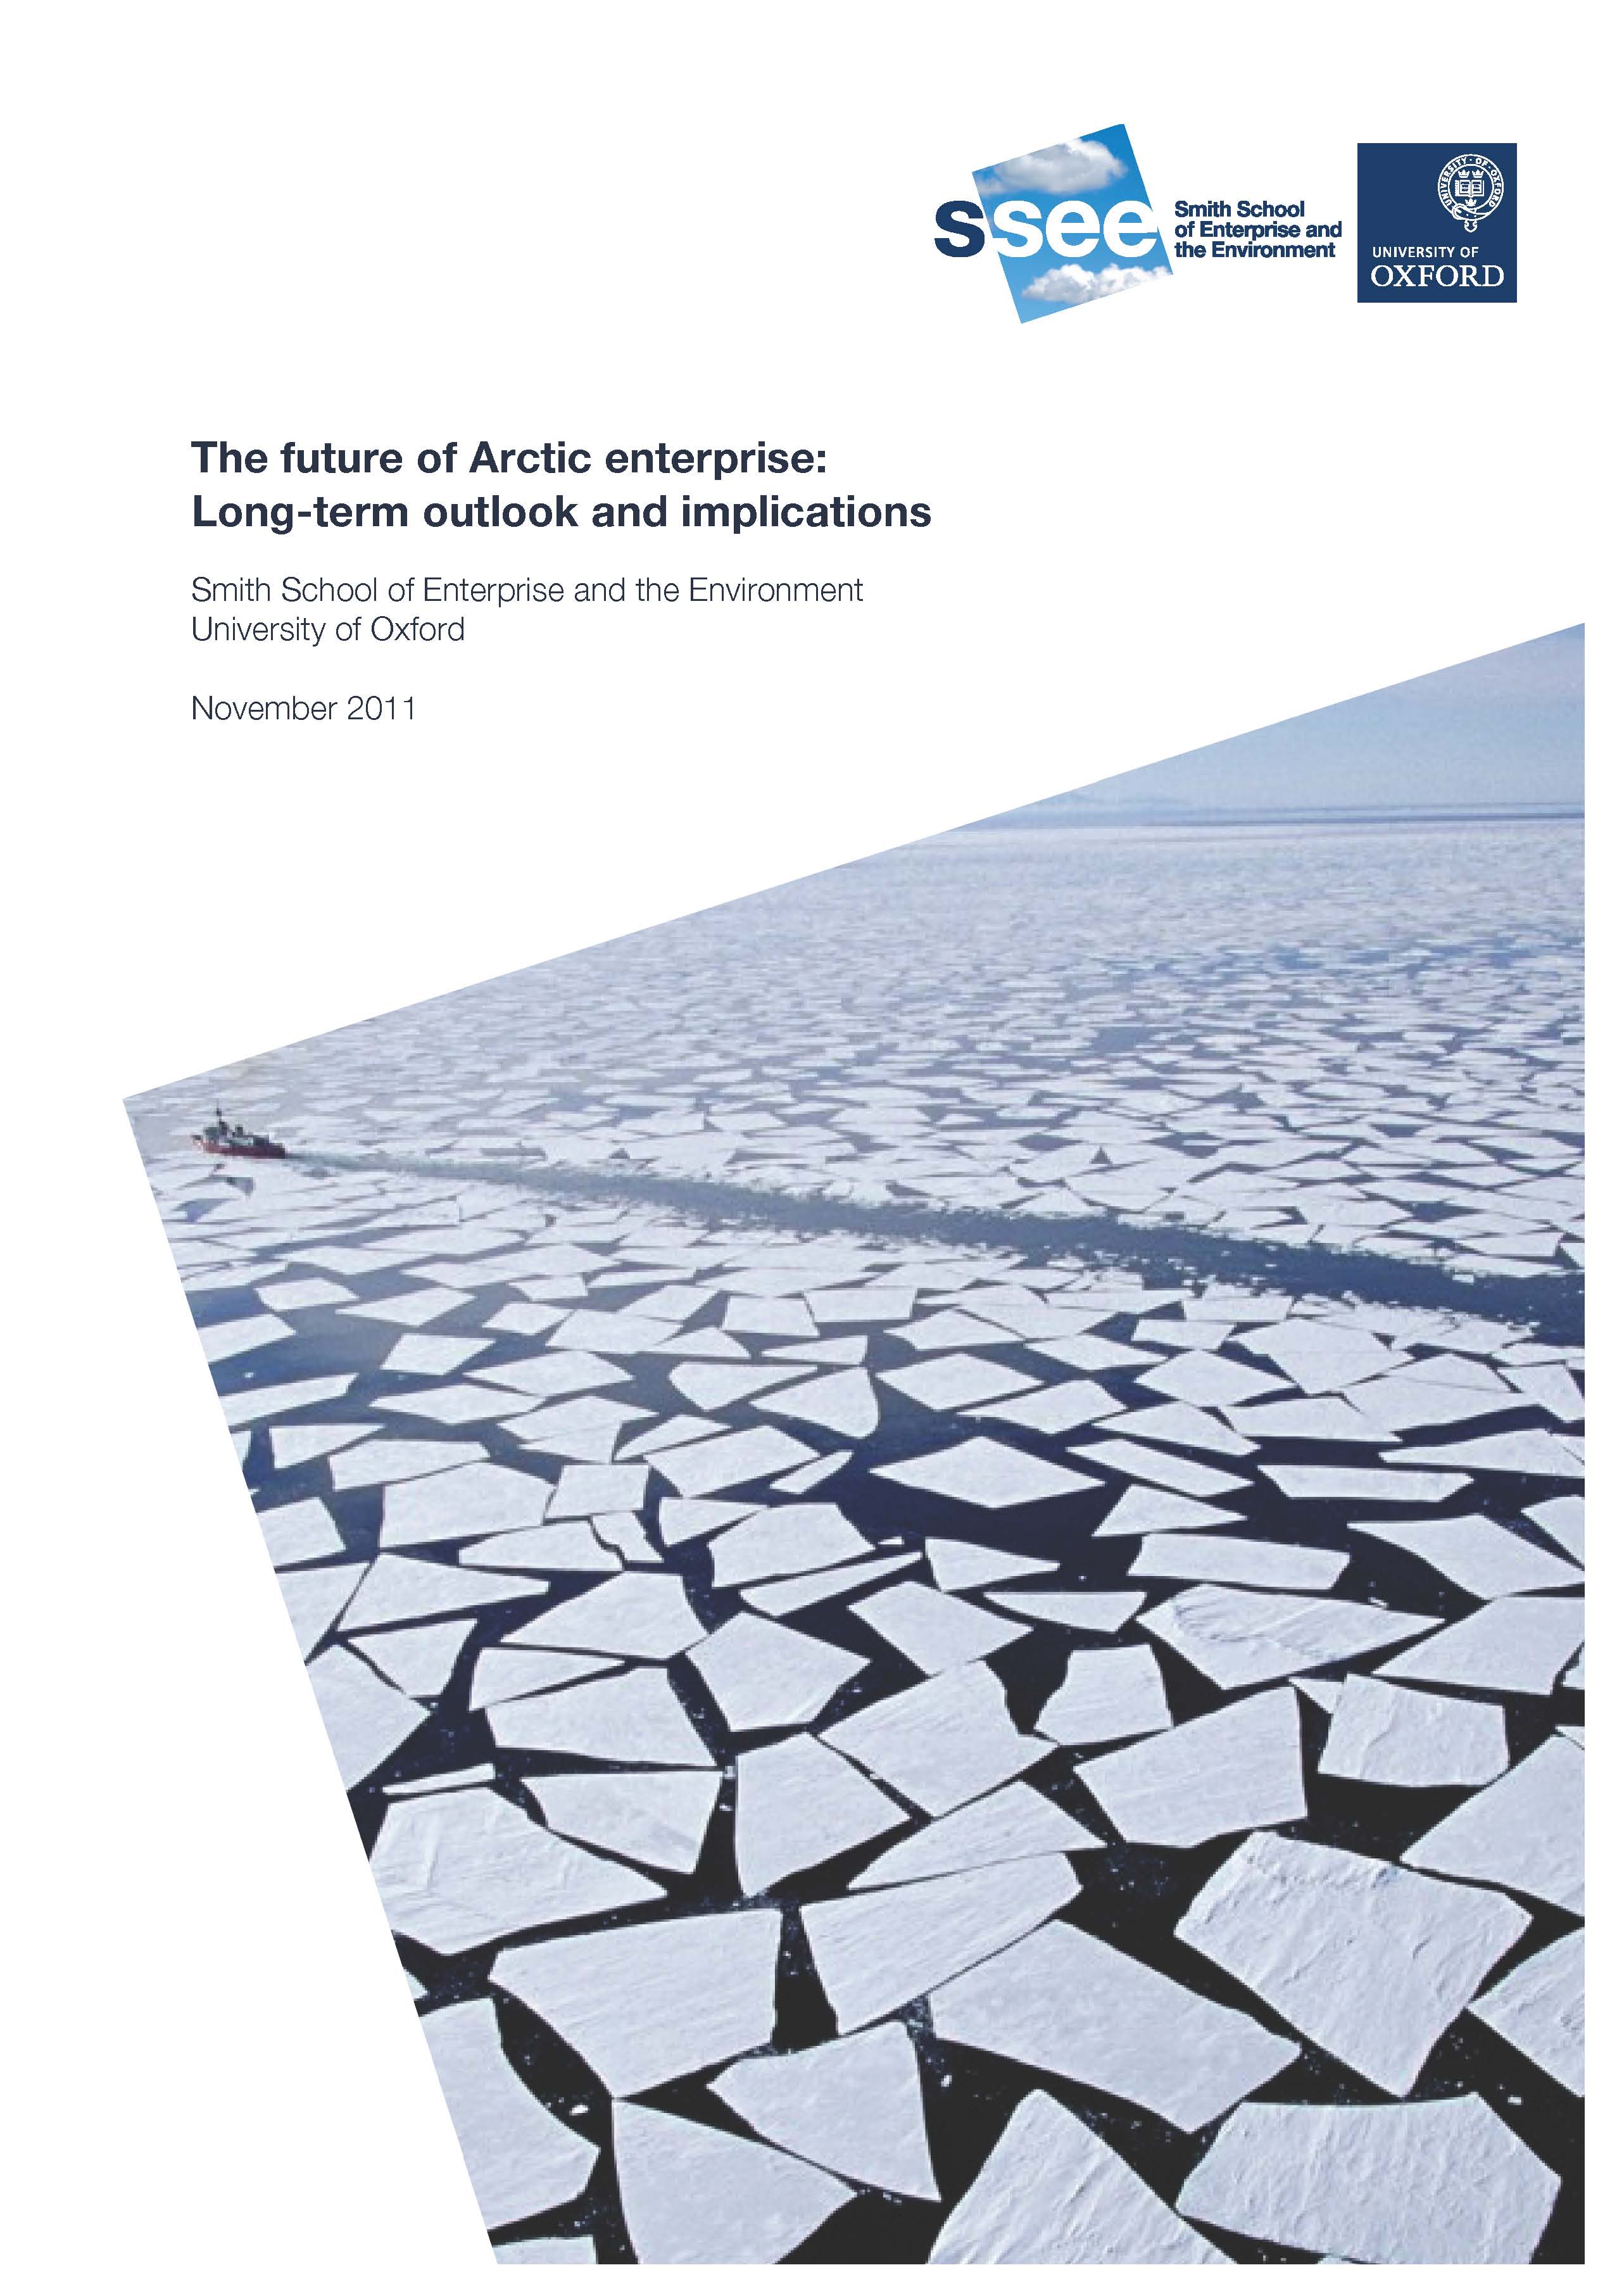 The future of Arctic enterprise:
Long-term outlook and implications